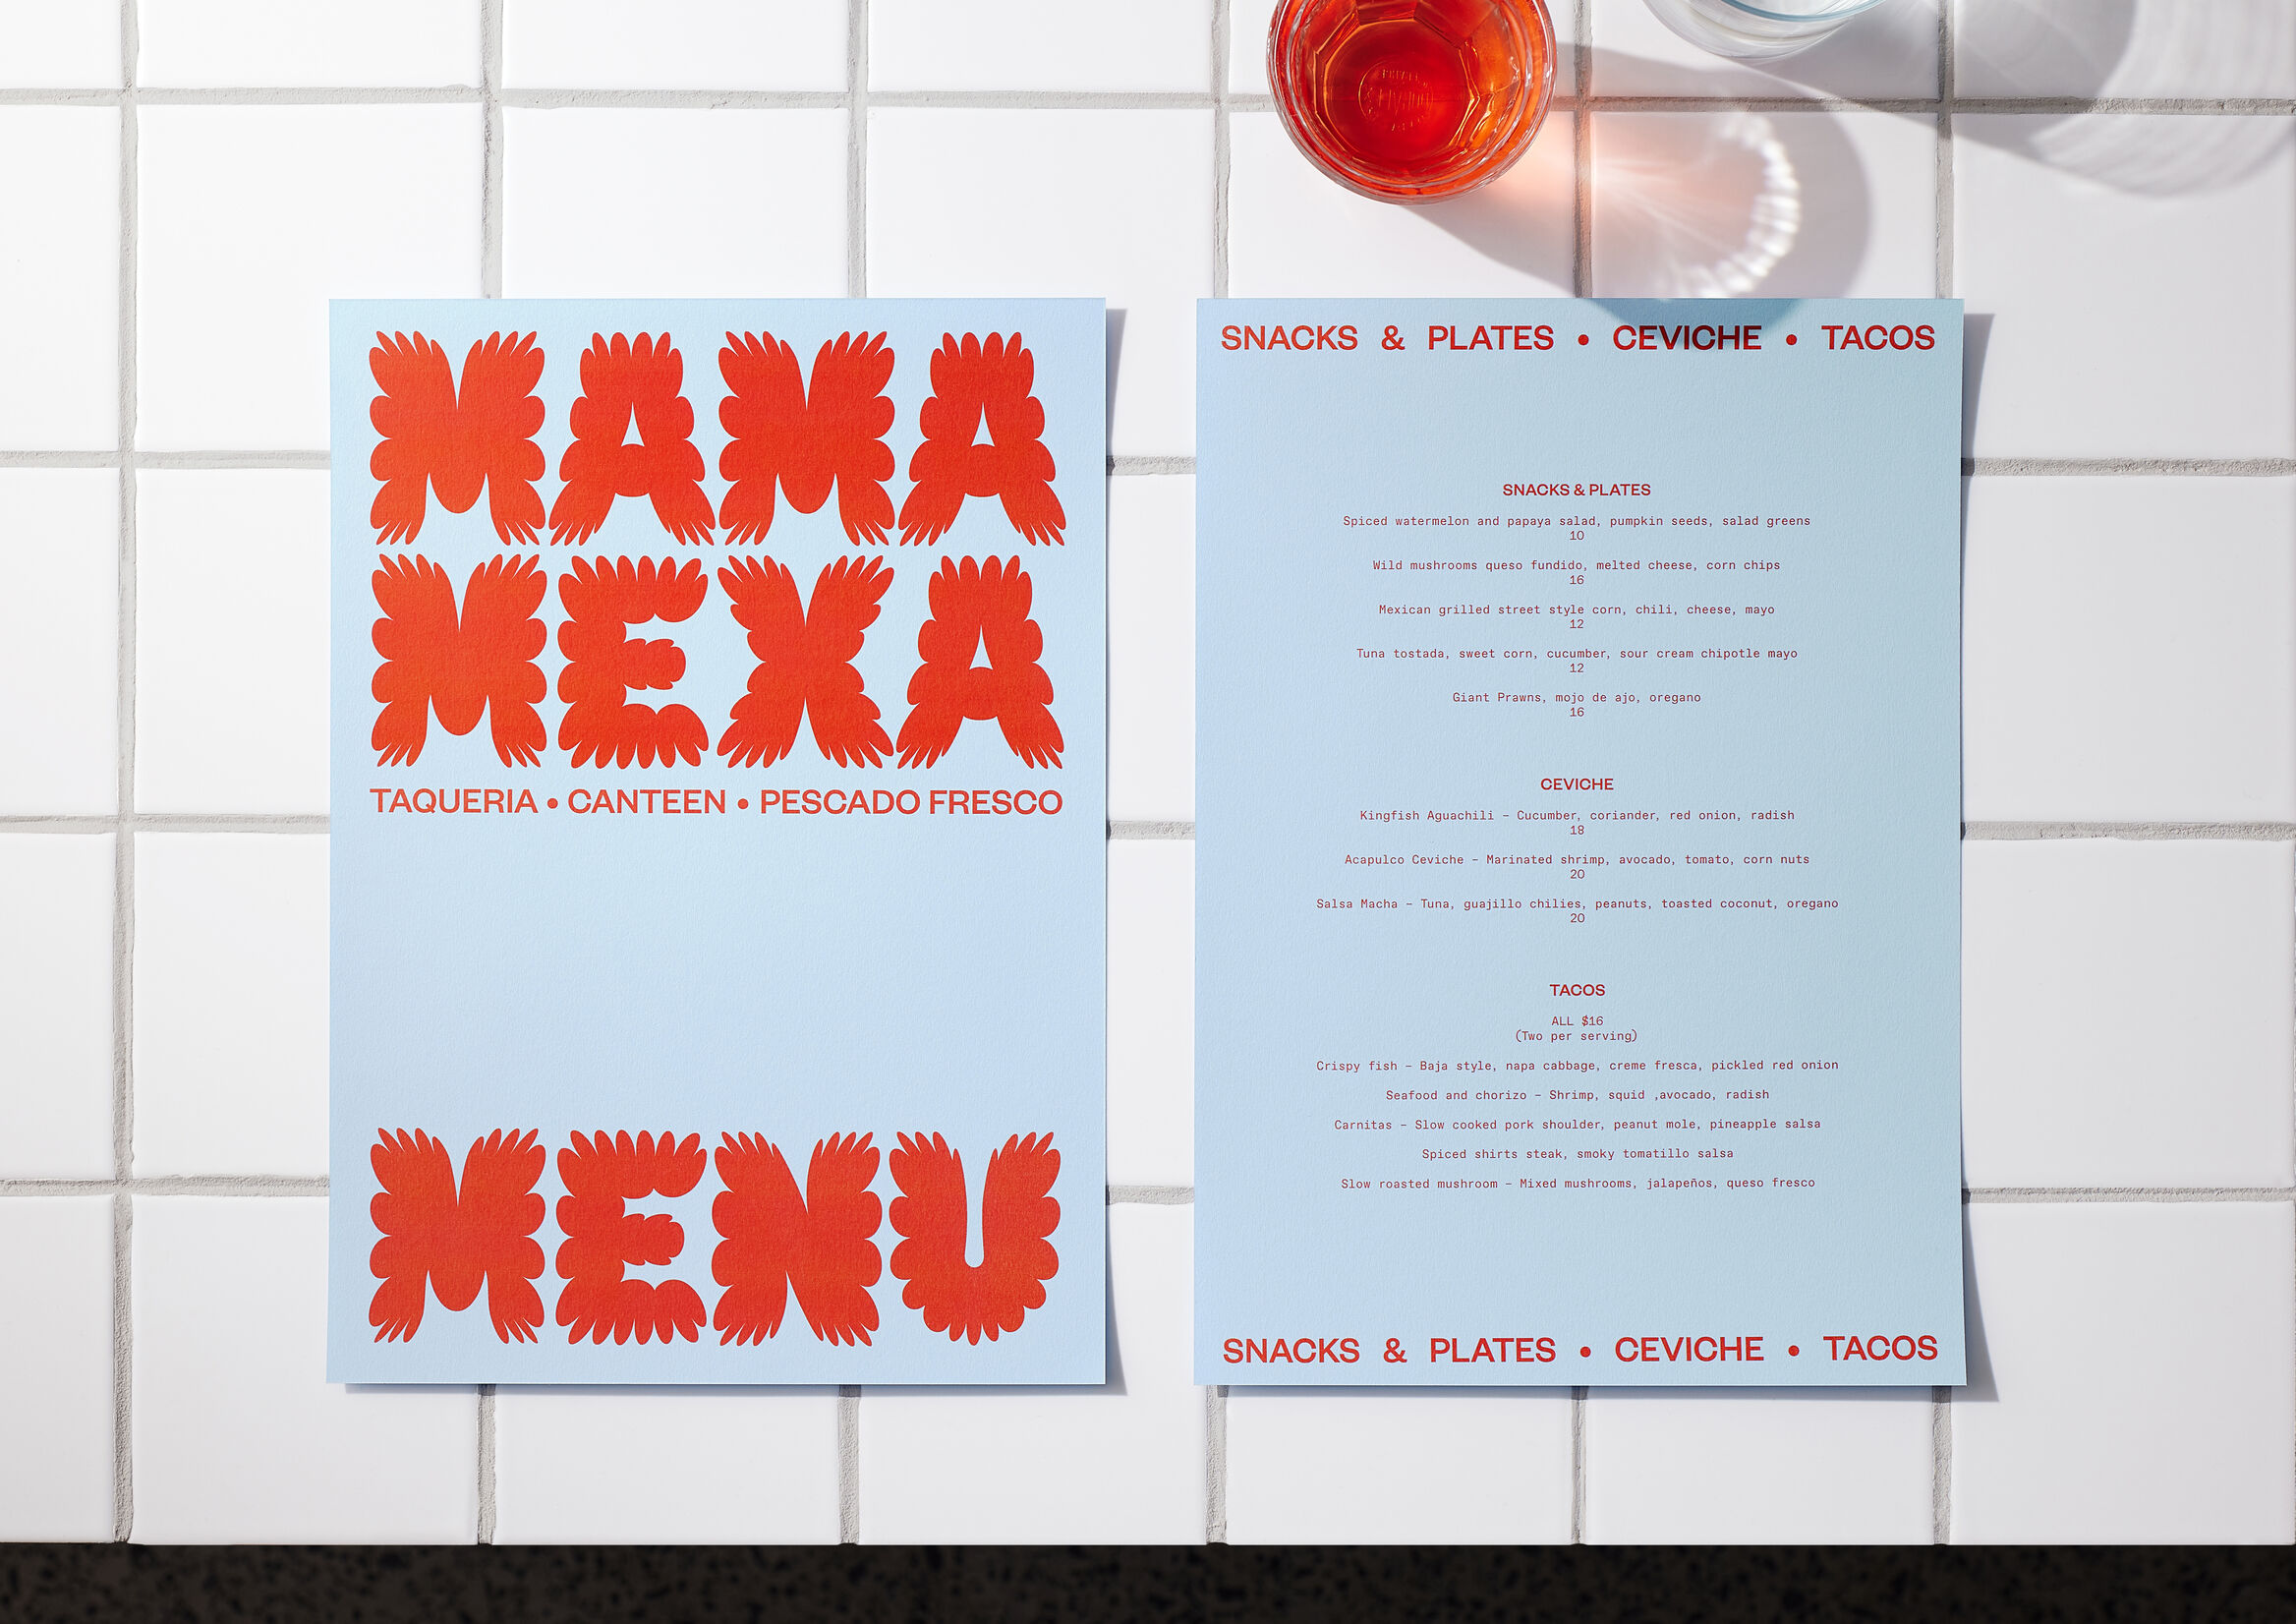 Brand identity and menu design by Seachange for Mama Mexa, an Auckland-based taqueria